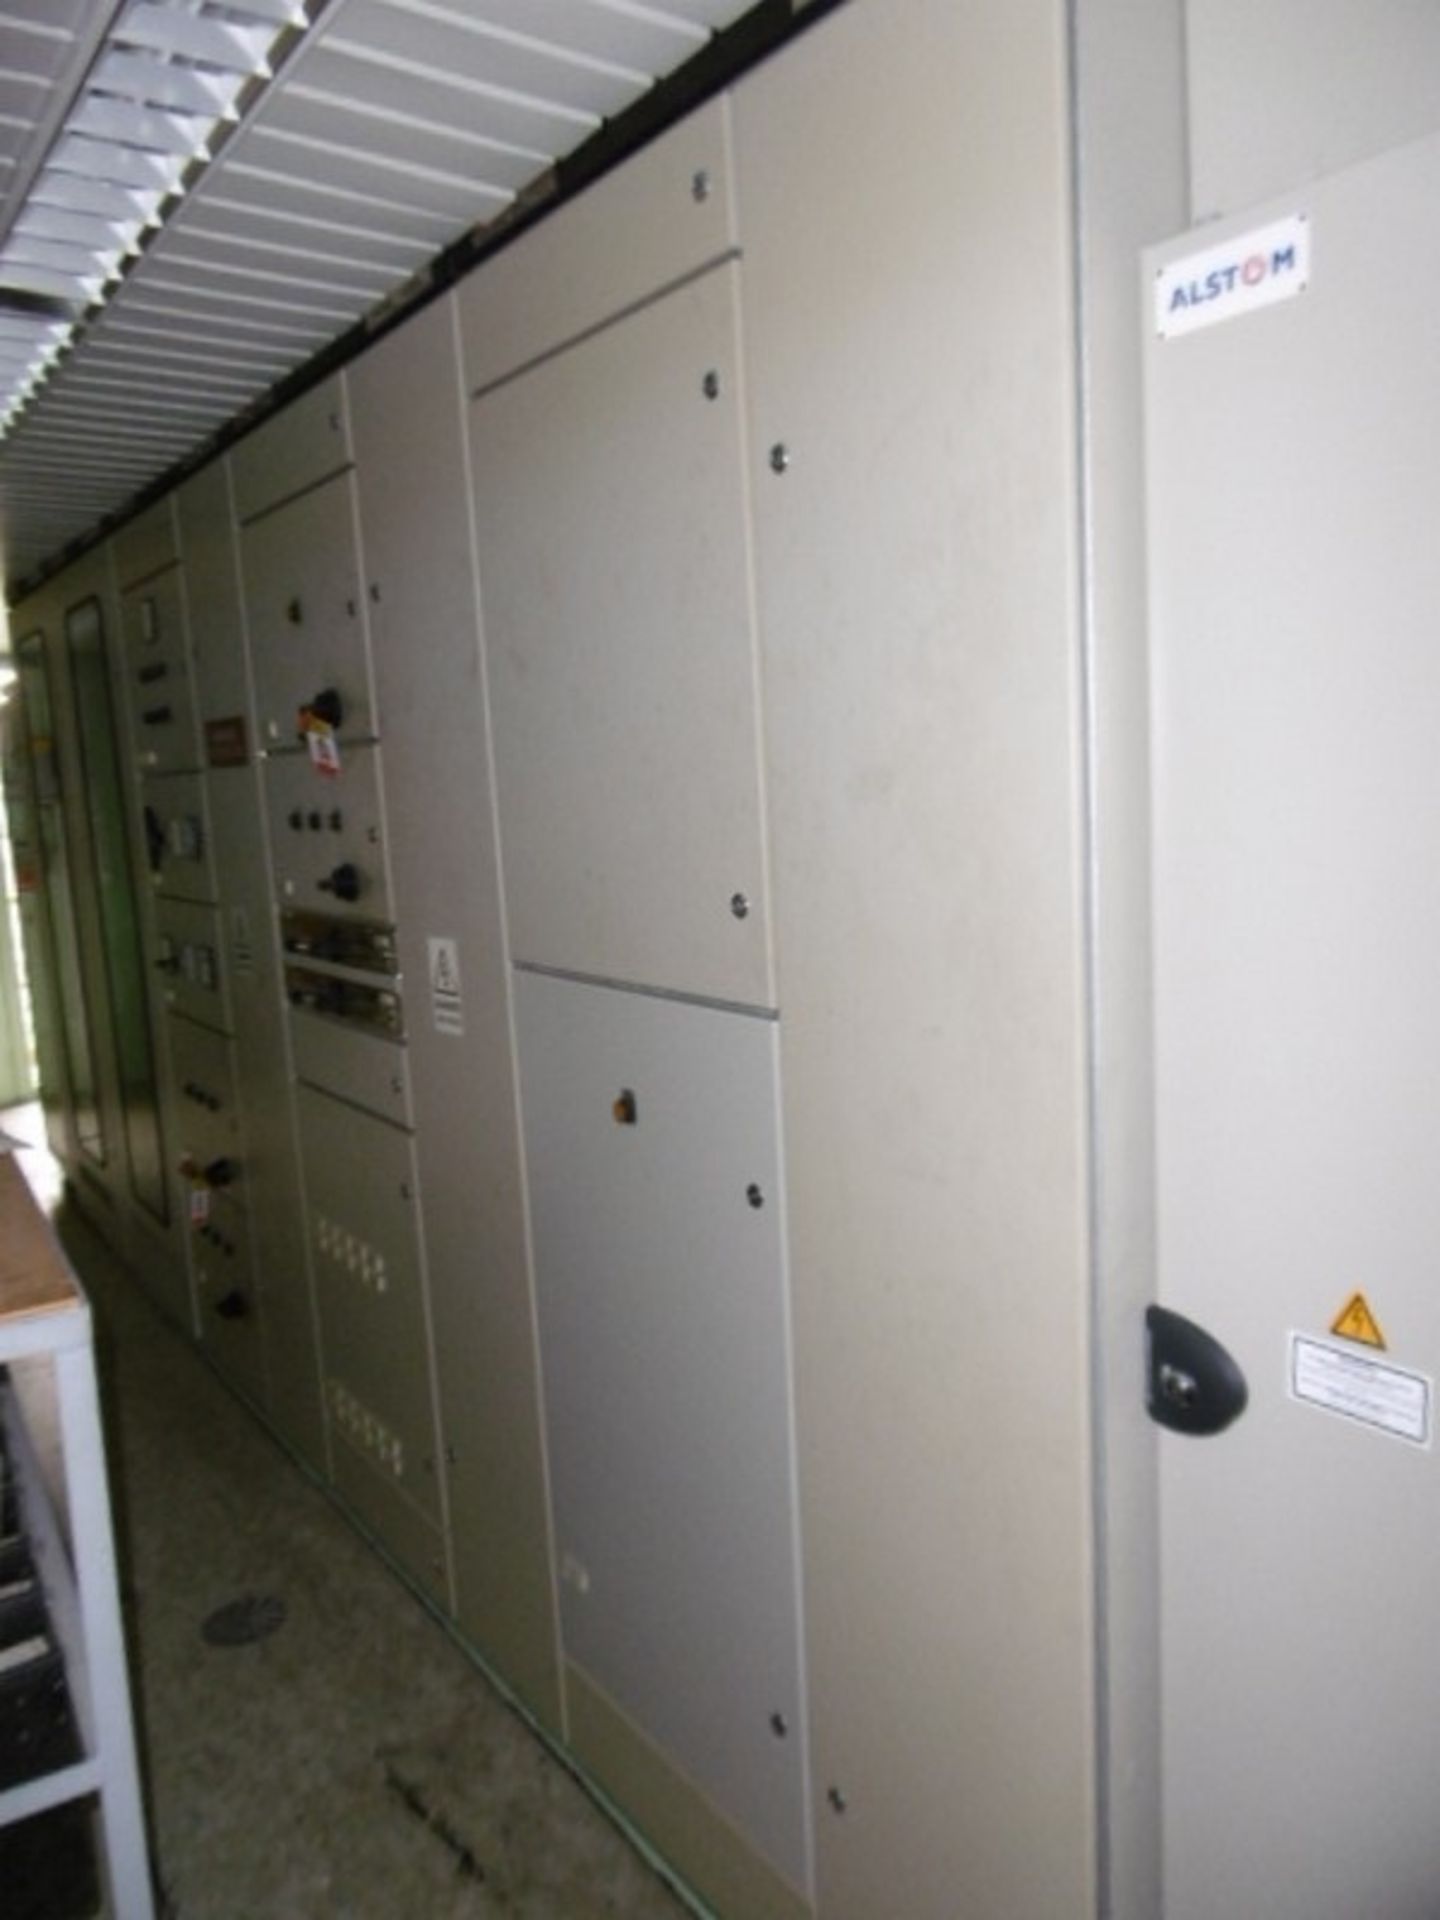 Large Qty Switchgear - From Gas Turbine 2 Control Module Building - Image 24 of 36